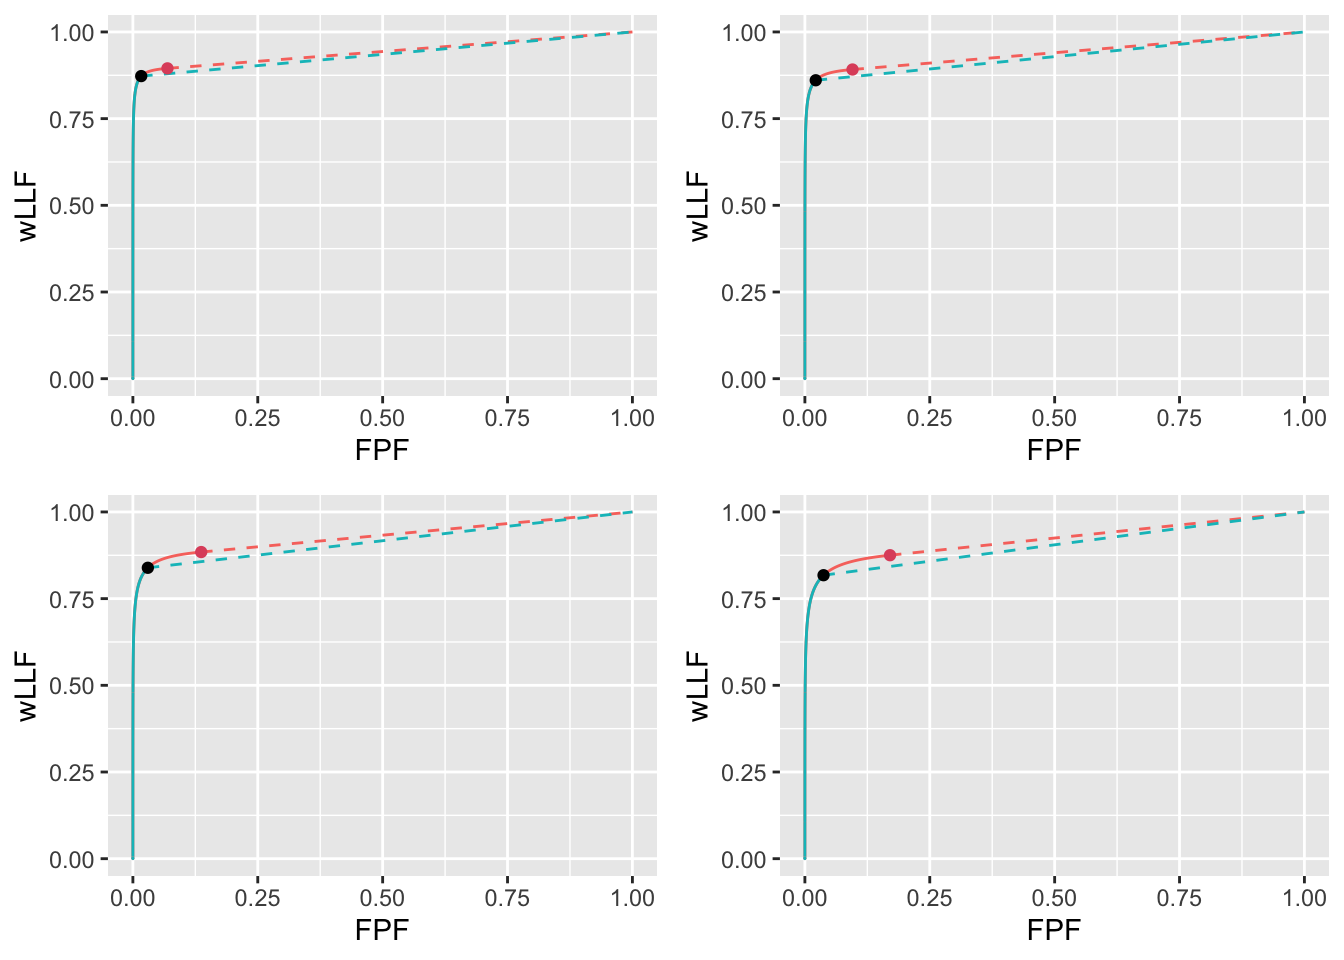 High performance varying $\lambda$ wAFROC plots for the two optimization methods with superimposed operating points. The color coding is as in previous figures. The values of $\lambda$ are: top-left $\lambda = 1$, top-right $\lambda = 2$, bottom-left $\lambda = 5$ and bottom-right $\lambda = 10$.